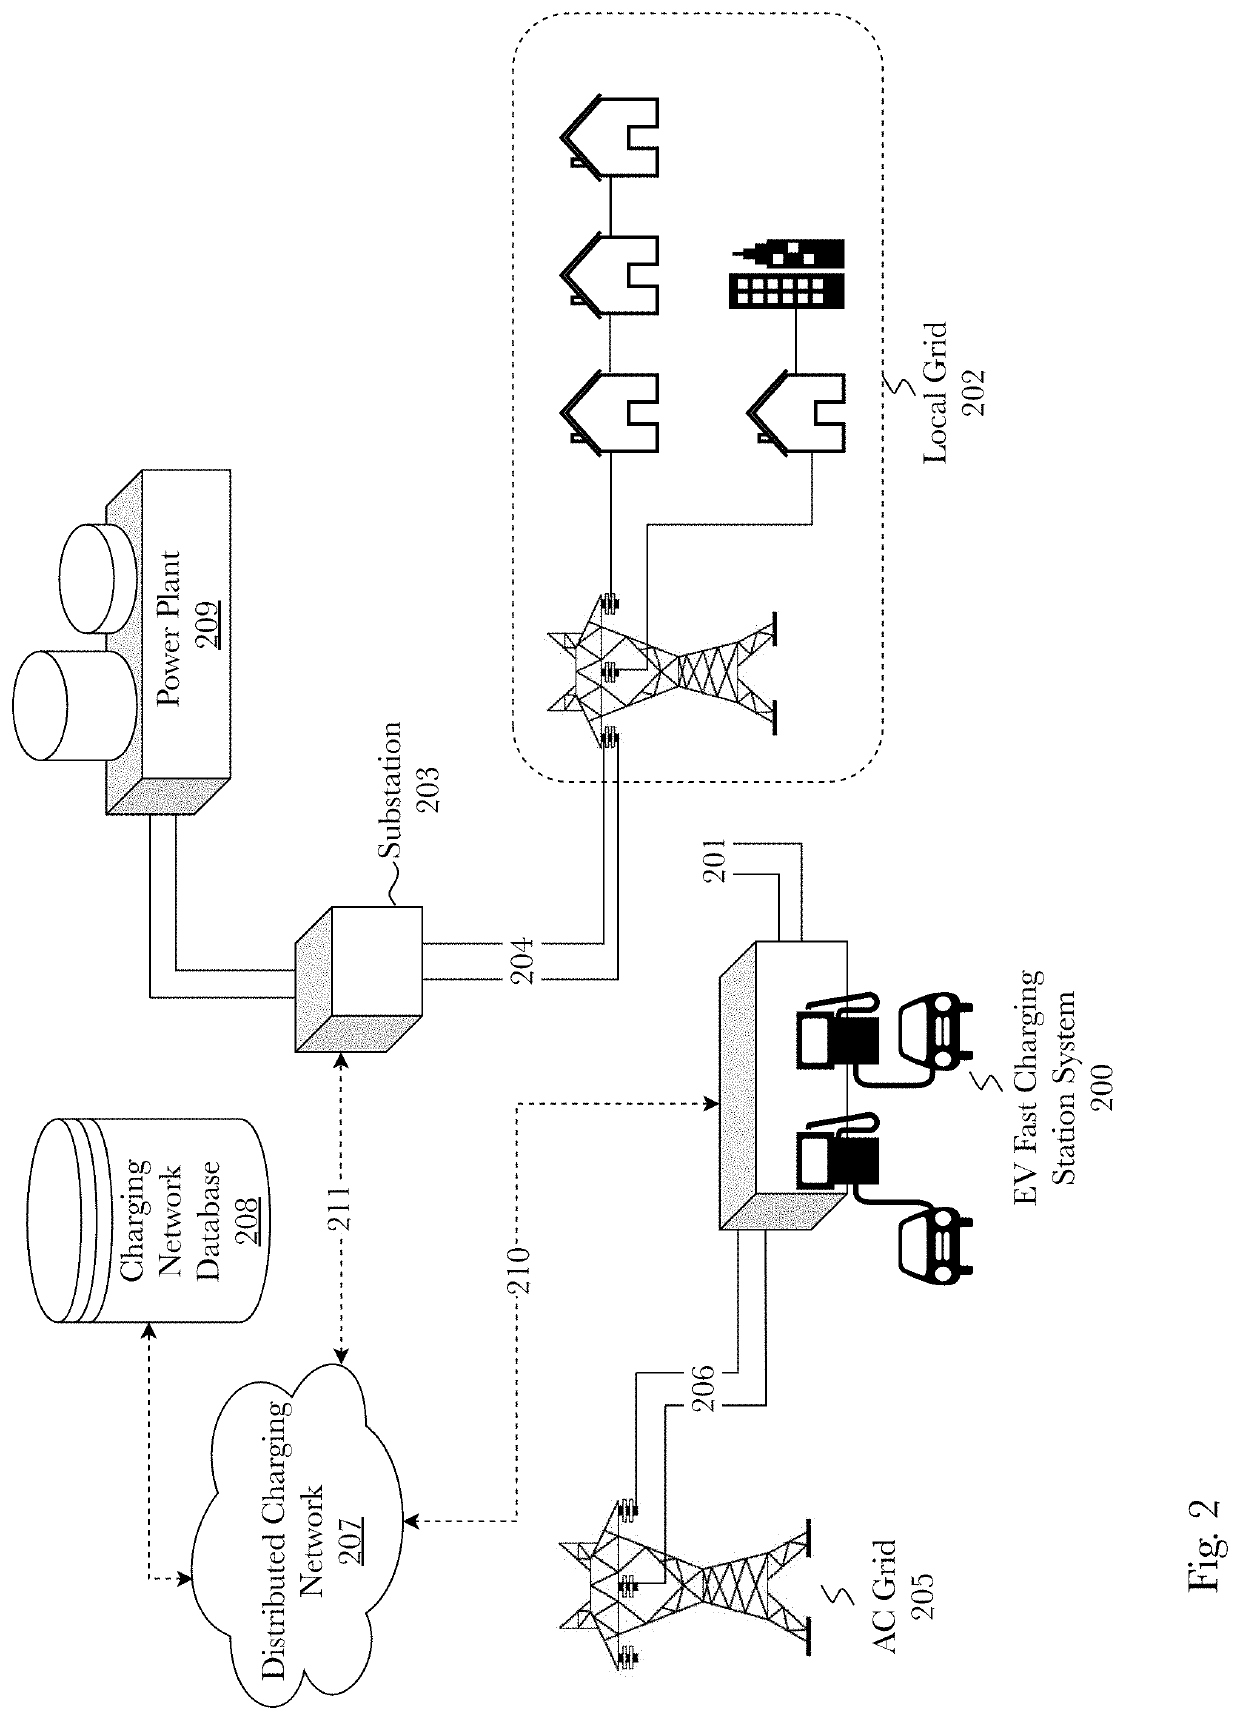 Fast electric vehicle charging and distributed grid resource adequacy management system